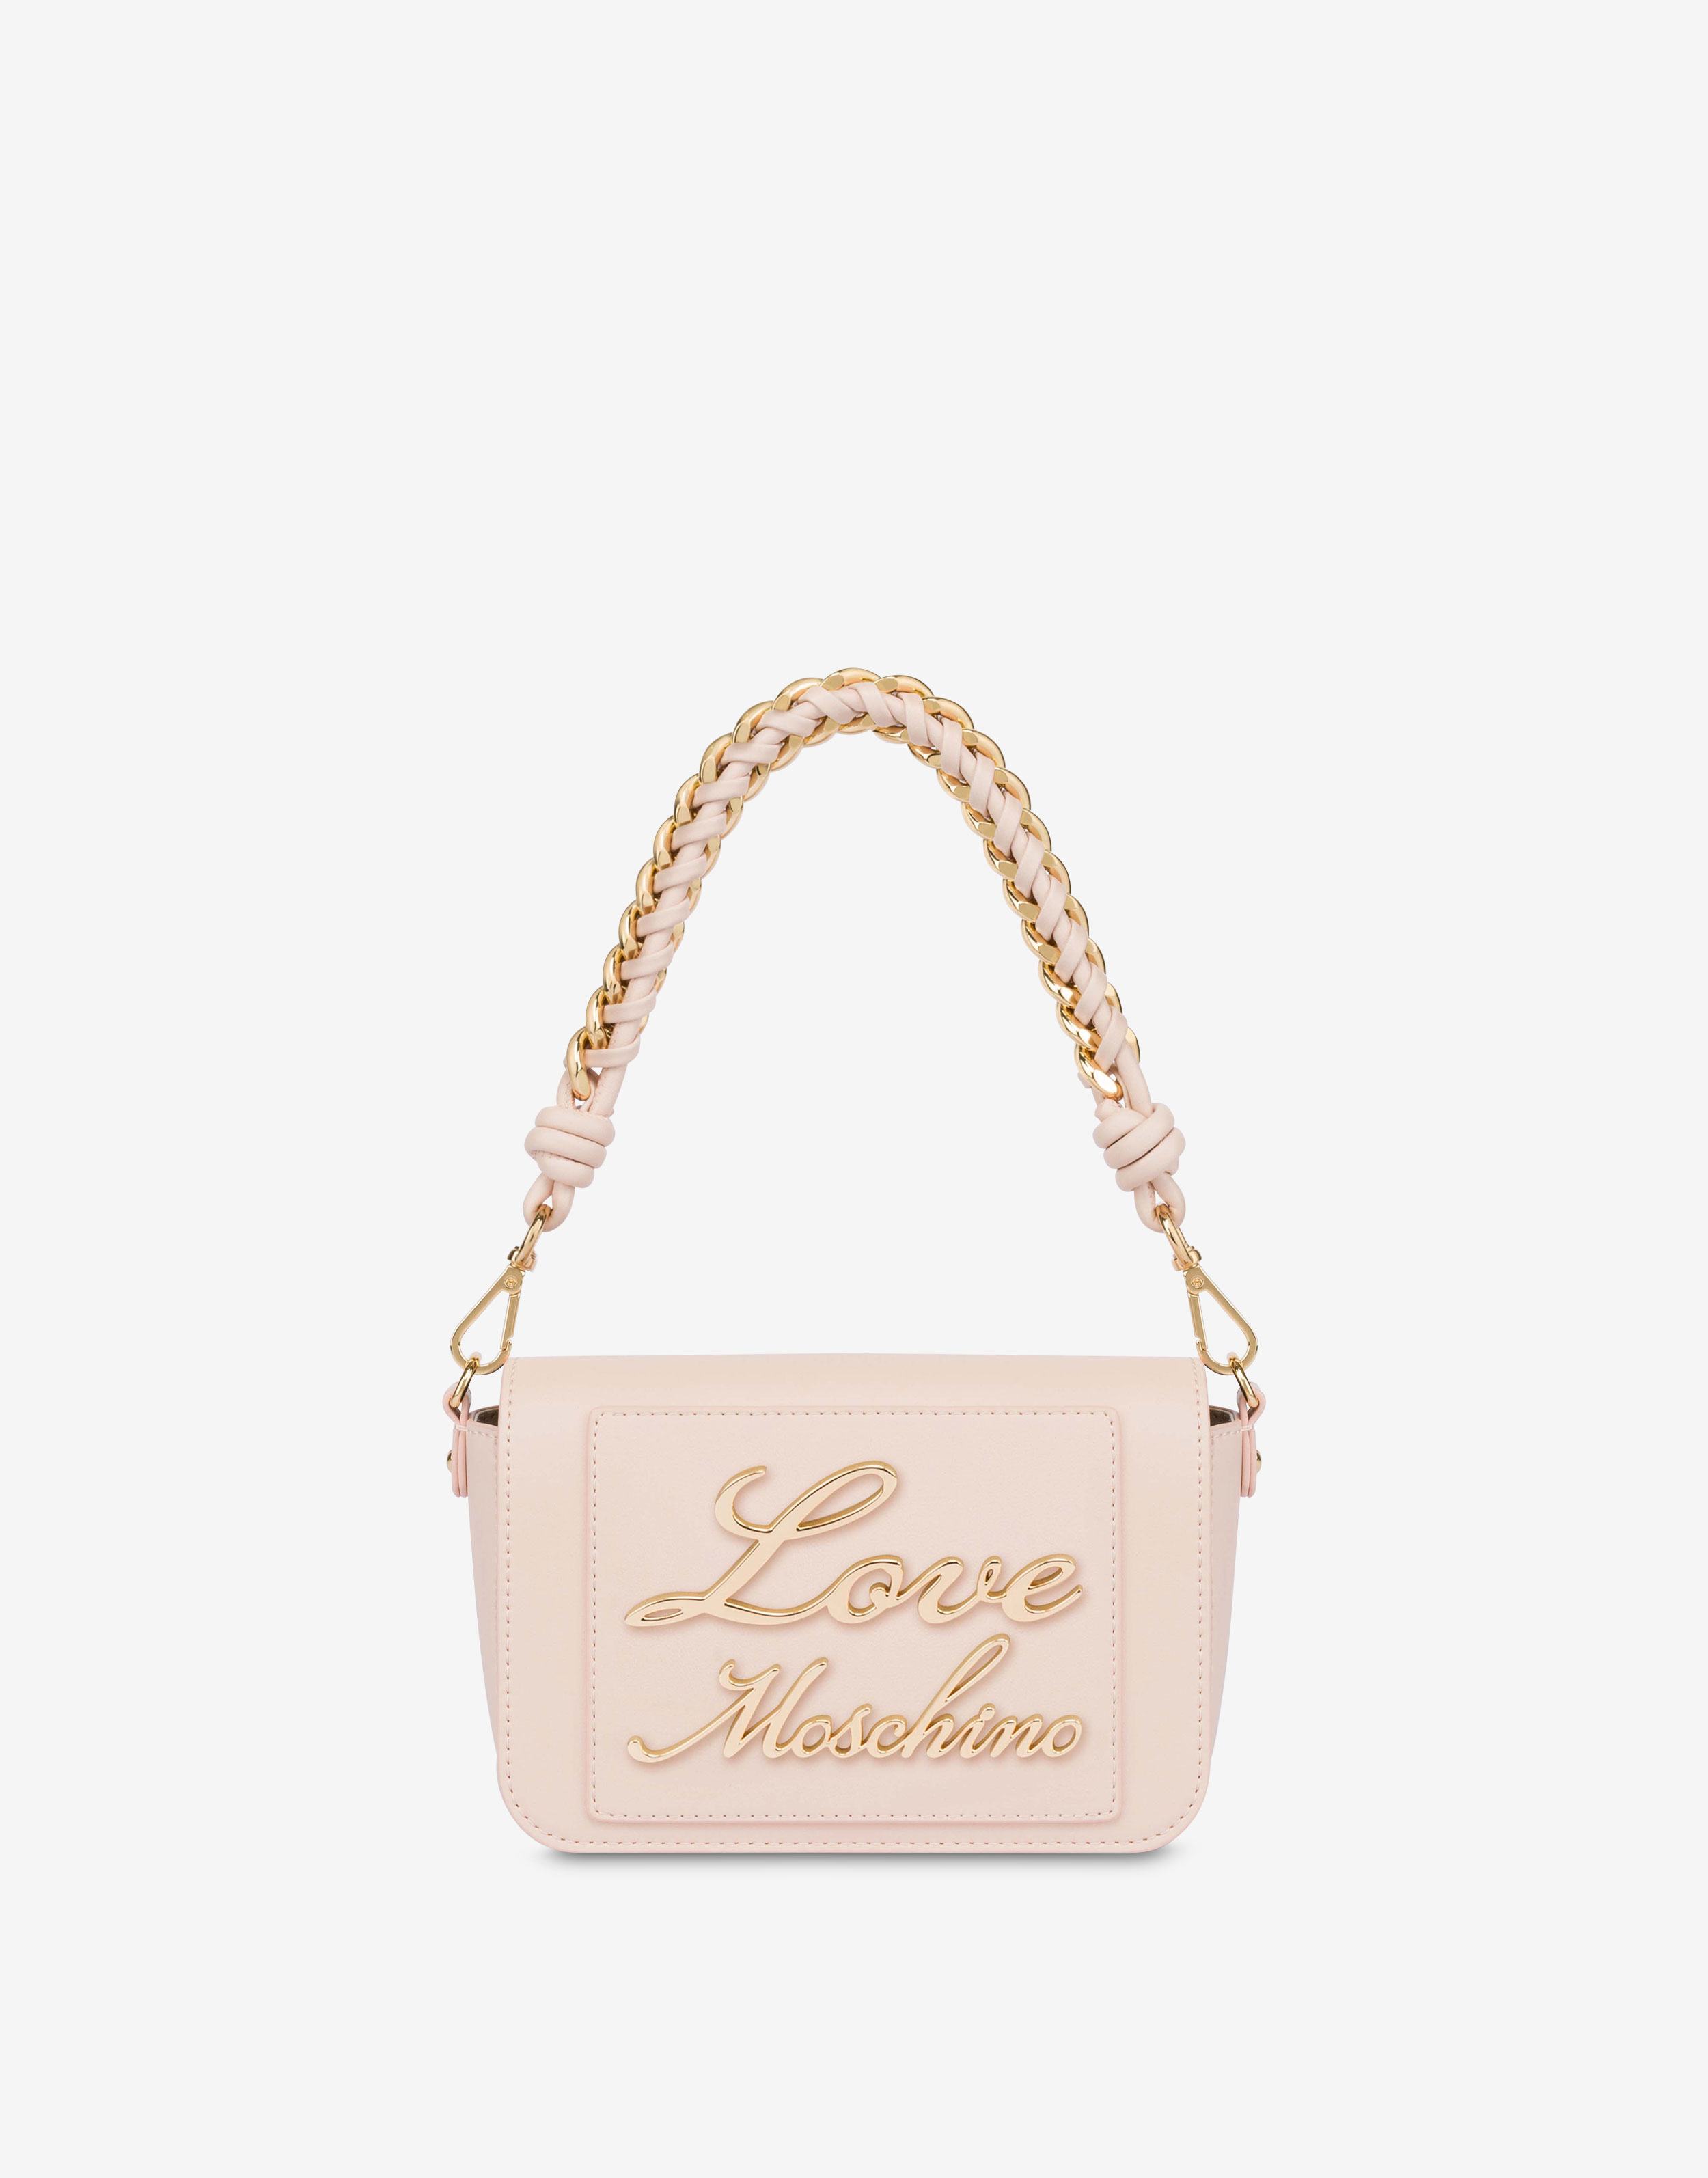 Love Moschino for Women - Official Store in the United States